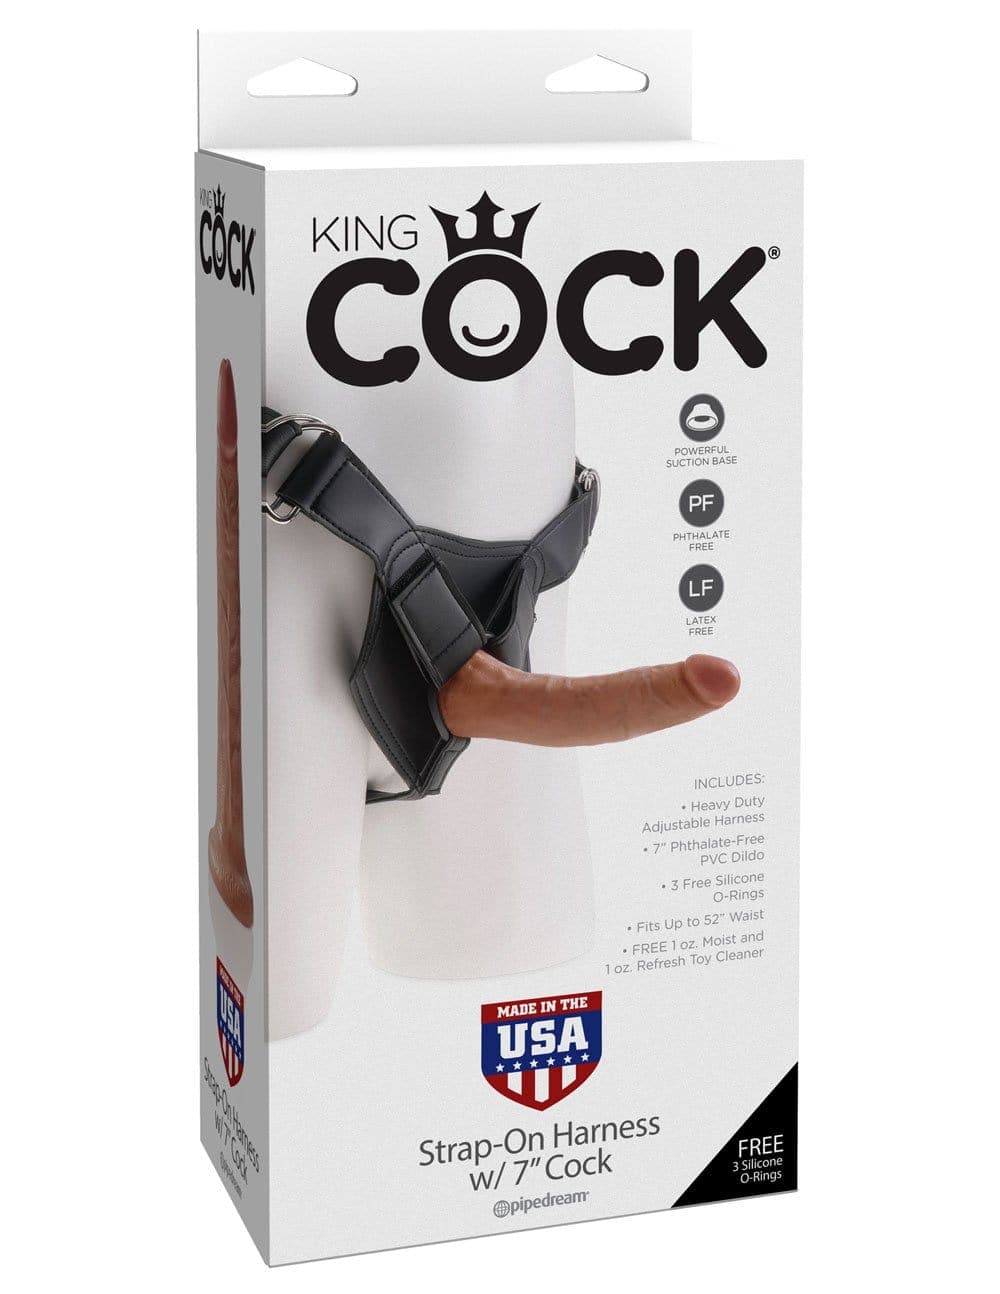 king cock strap on harness with 7 cock tan